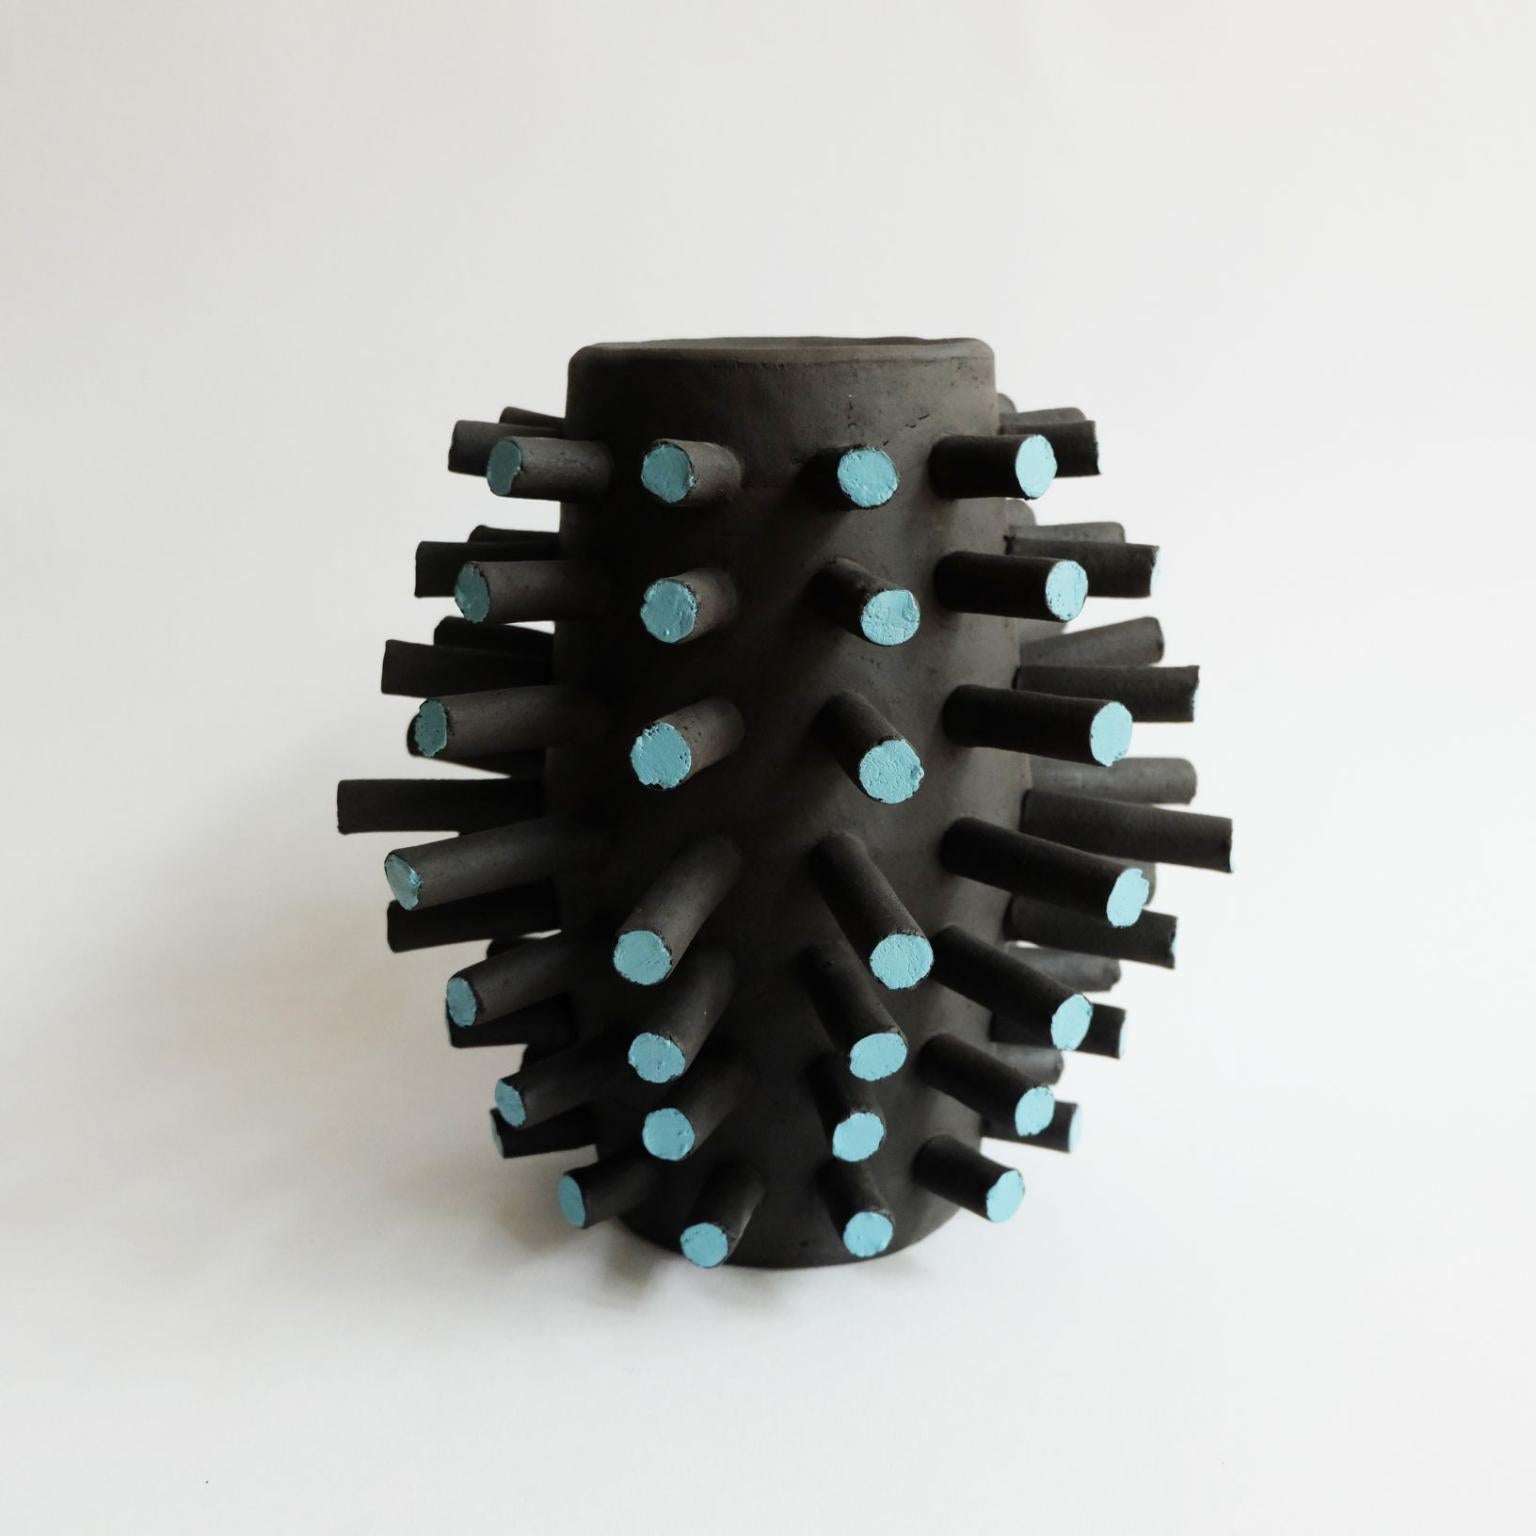 Sculptural Cyto Vessel by Ia Kutateladze
Dimensions: W 25 x H 25 cm
Materials: Raw Black Clay

“Playground For Salvation” was created entirely during quarantine, in my Berlin studio. The stillness of the lockdown enabled me to experiment and